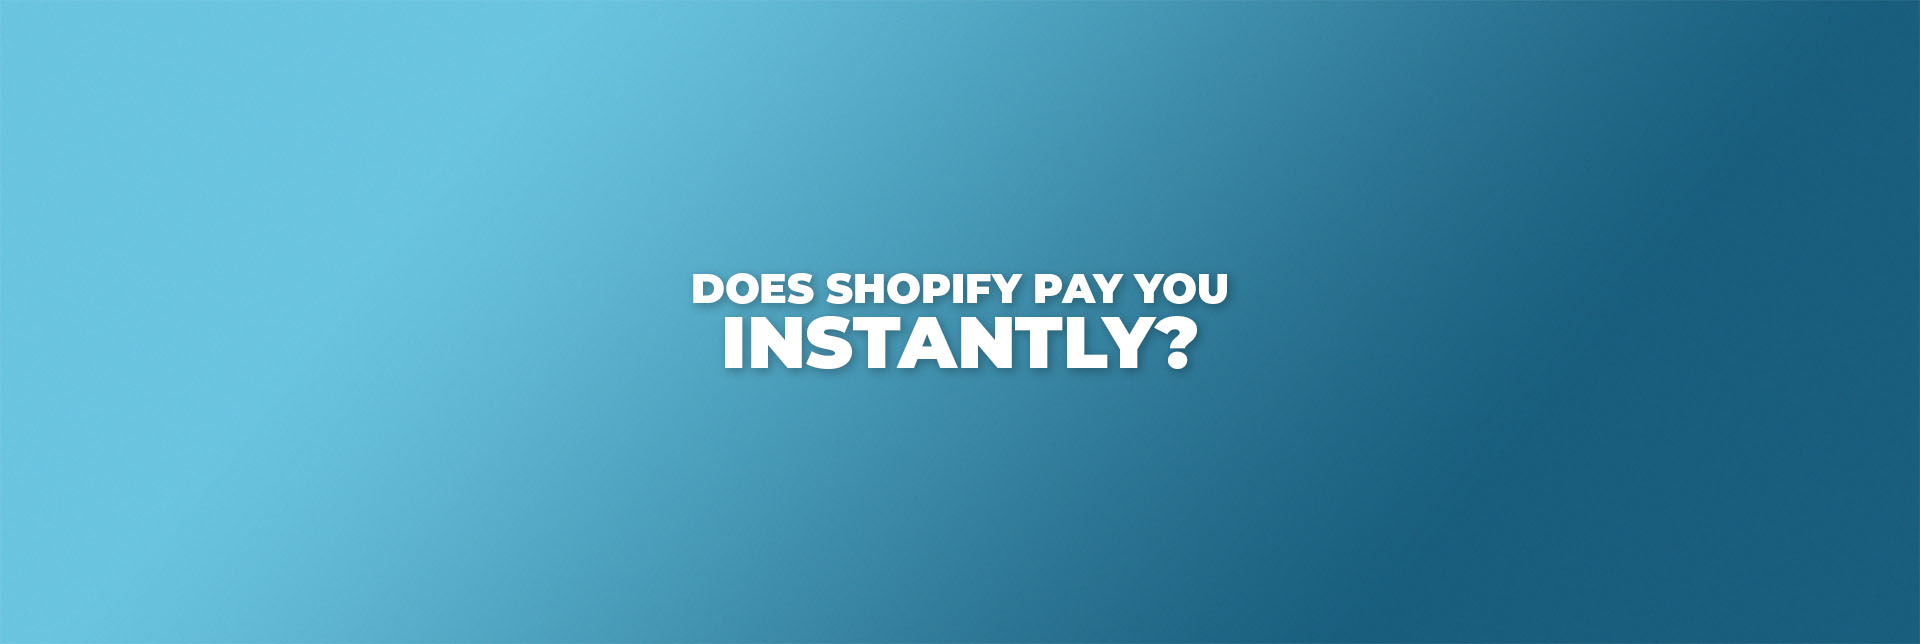 Does Shopify Pay You Instantly_